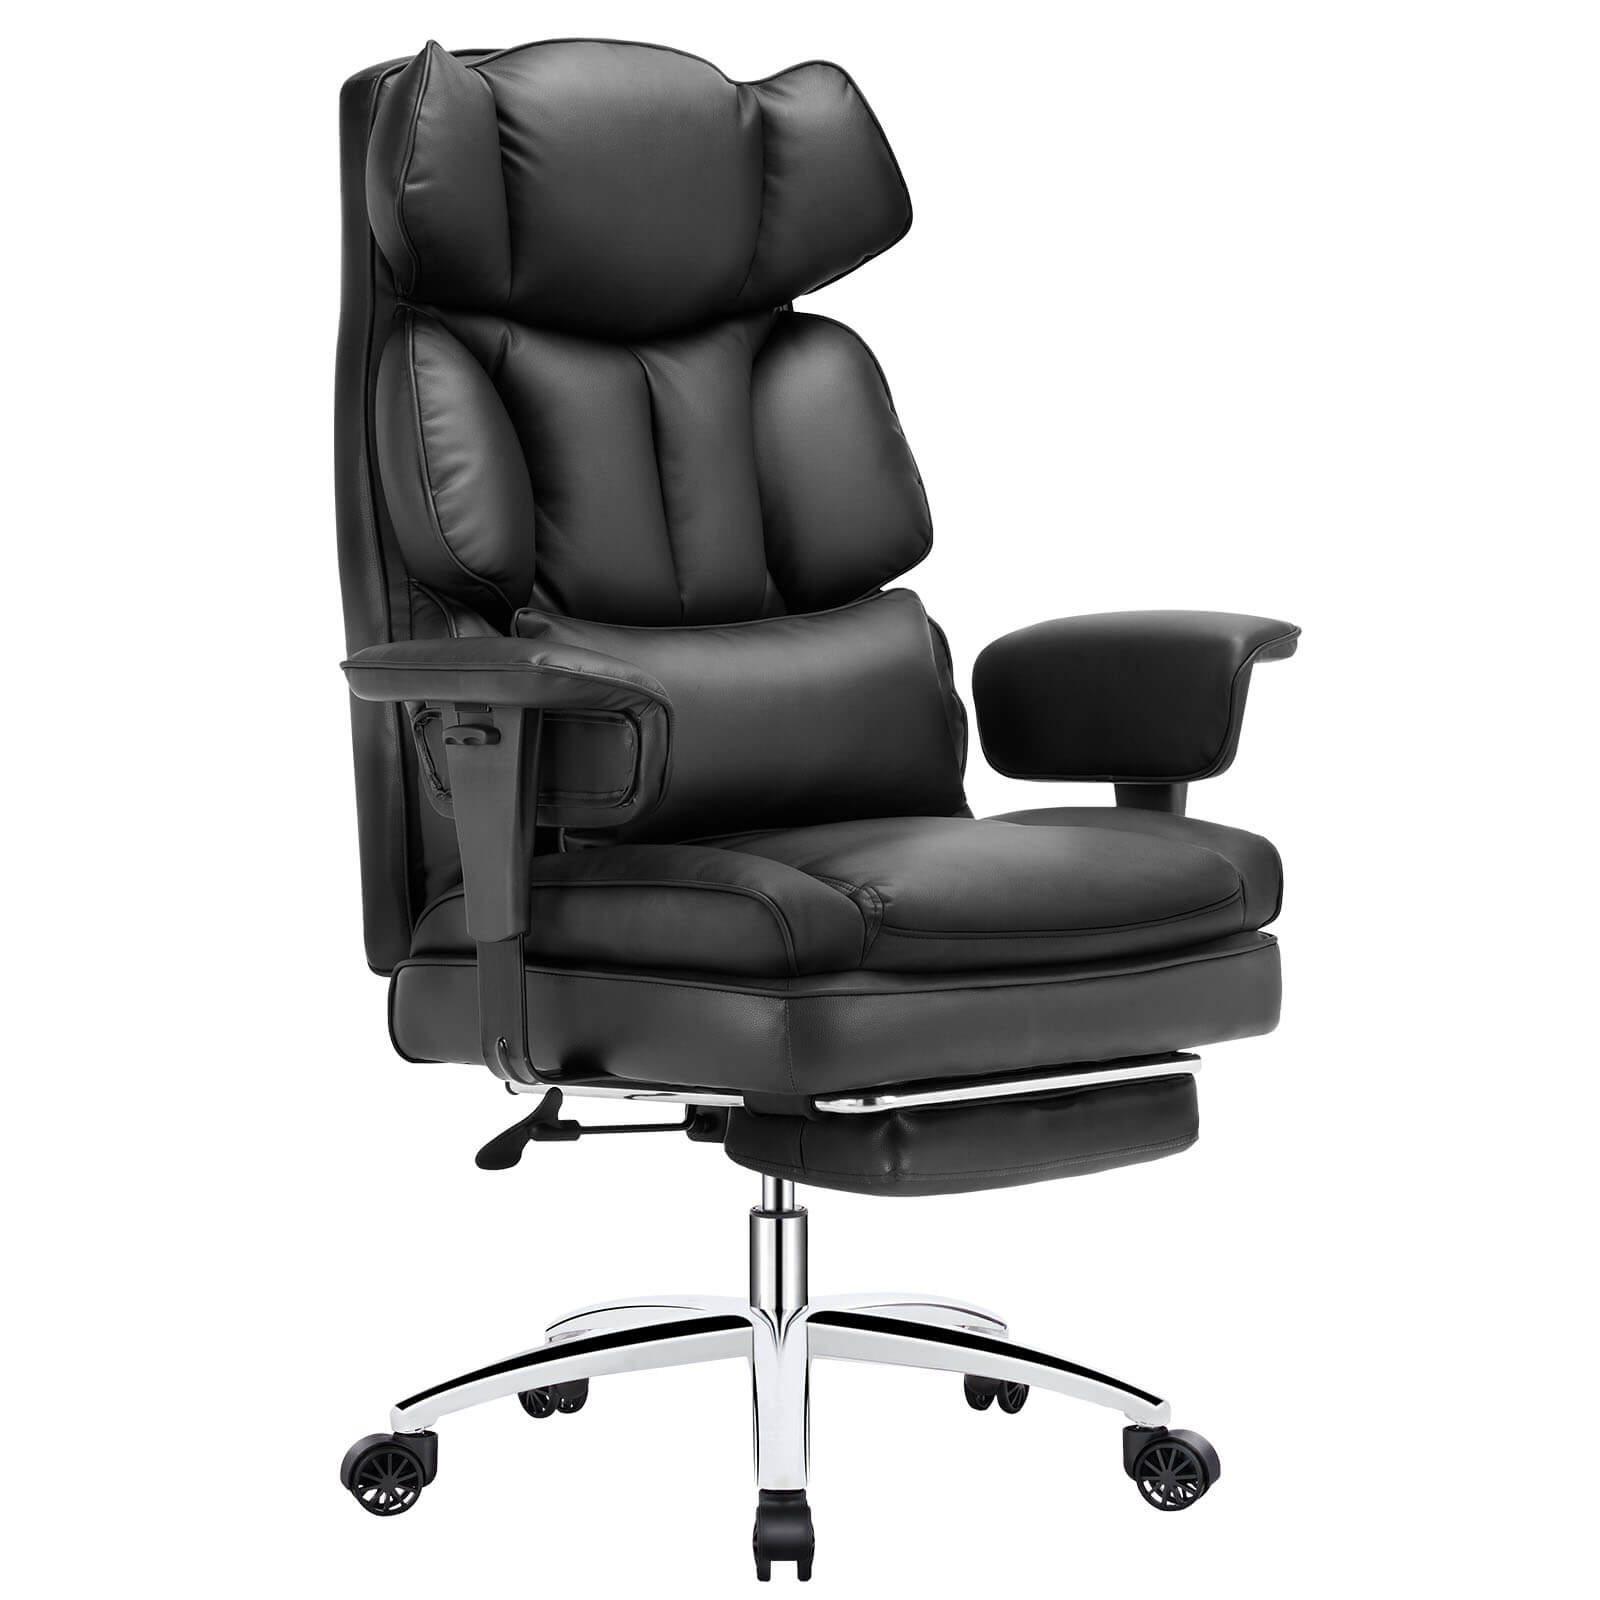 Office Computer Chair - High Back PU Leather Taipan Swivel Chair with Ergonomic Leg Rest and Lumbar Support, Height Adjustable